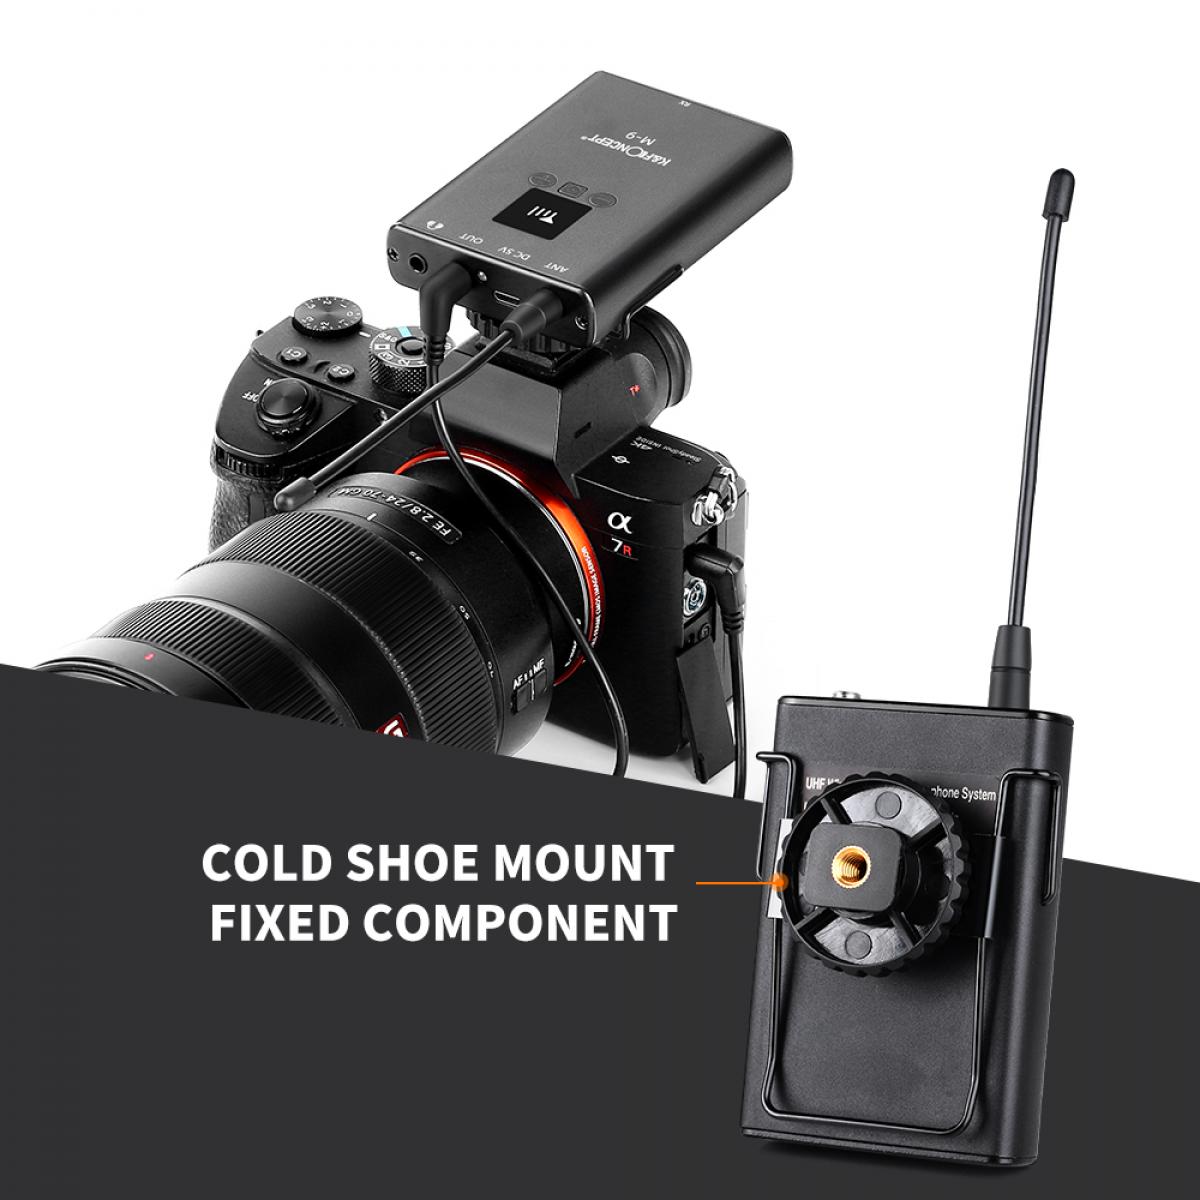 M9 Wireless Microphone Metal Shell Support SLR Cameras, Digital Cameras, Receivers, Android Smart Phones, Laptops, DV